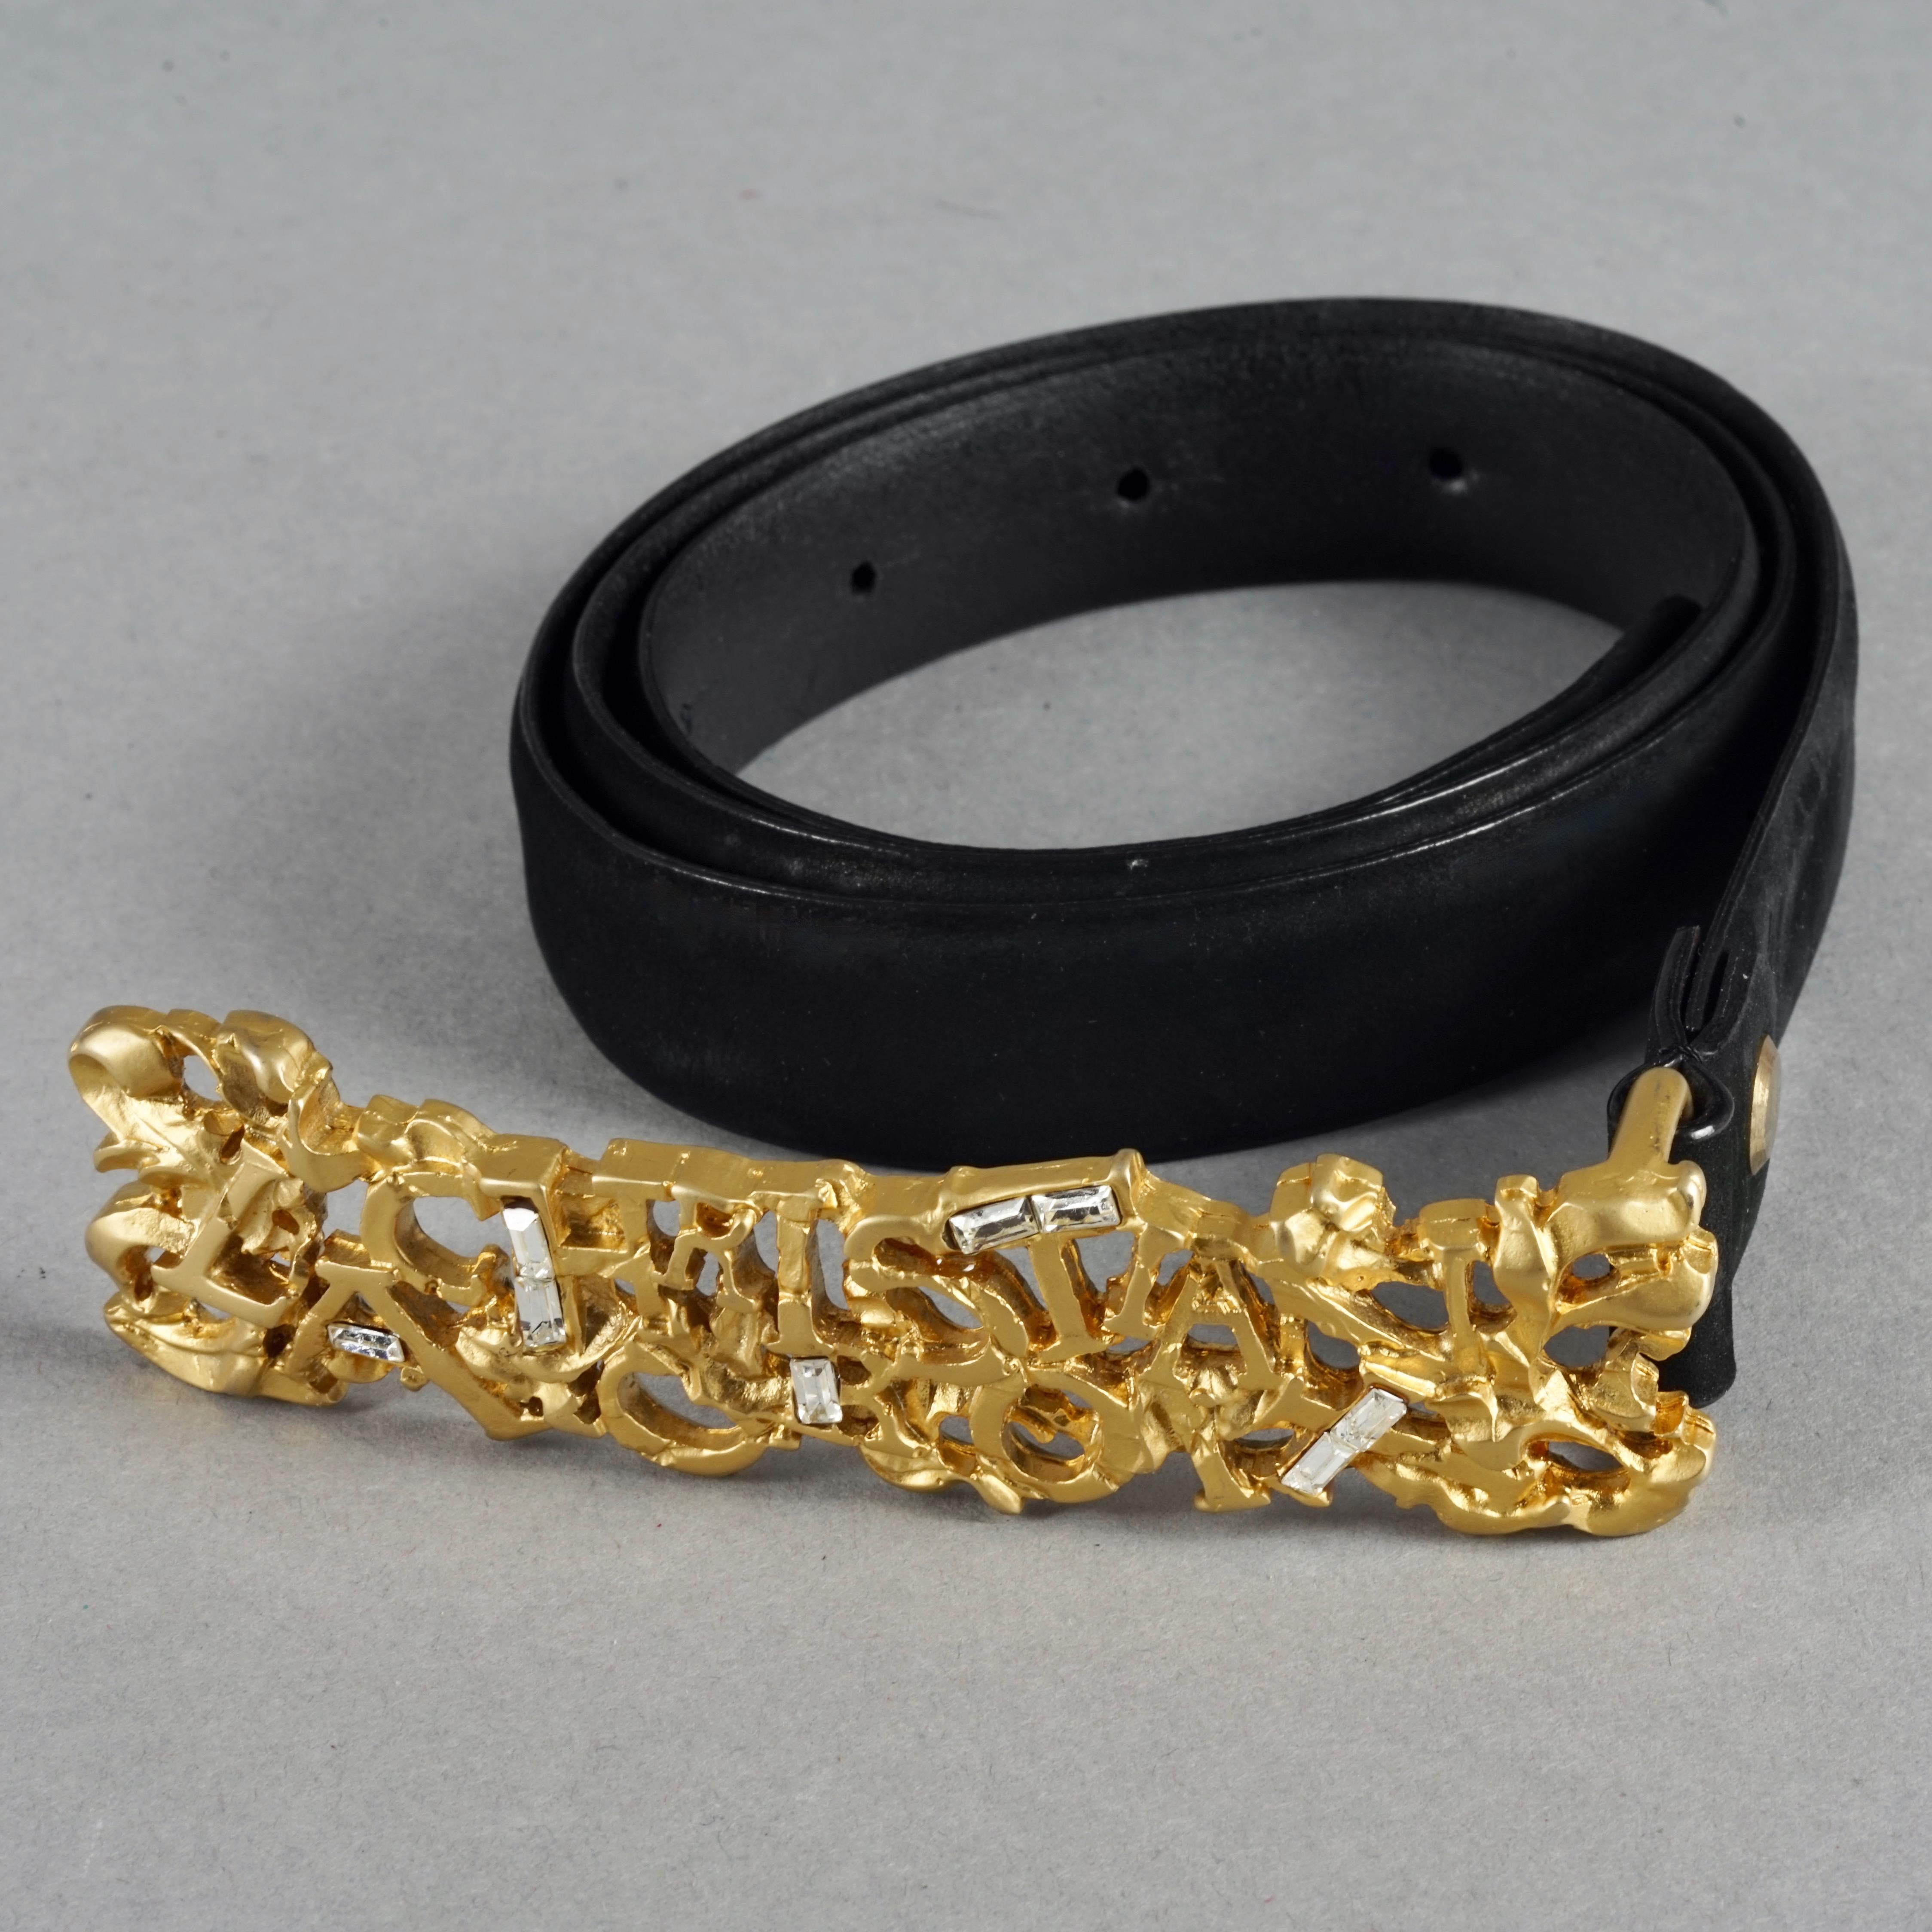 Vintage CHRISTIAN LACROIX Spelled Abstract Rhinestone Black Suede Skinny Belt In Excellent Condition For Sale In Kingersheim, Alsace